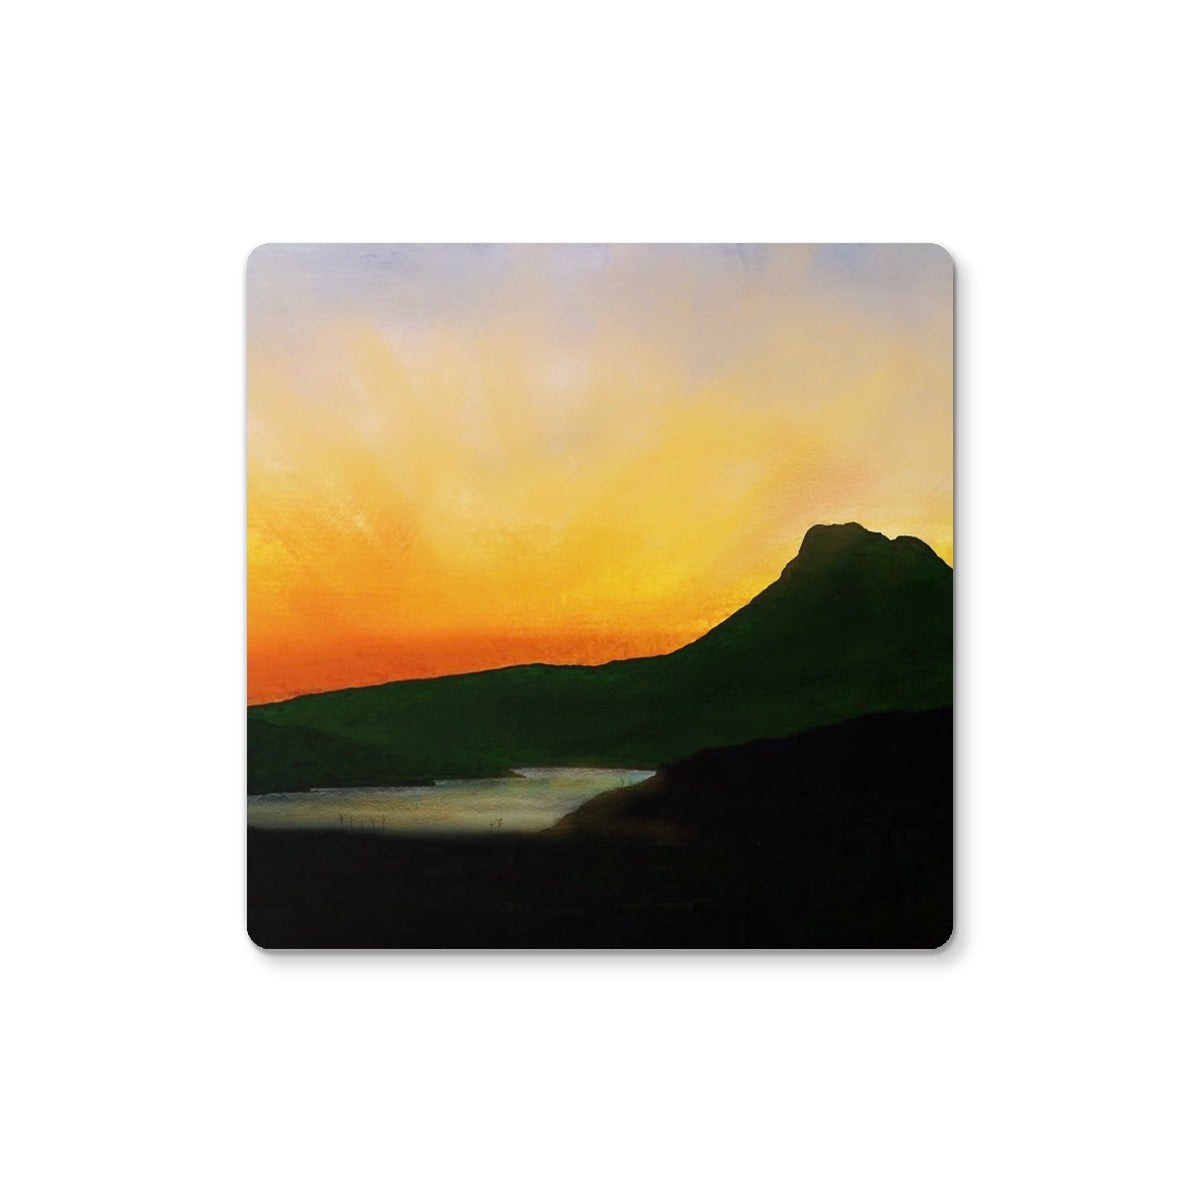 Stac Pollaidh Dusk Art Gifts Coaster-Coasters-Scottish Lochs & Mountains Art Gallery-Single Coaster-Paintings, Prints, Homeware, Art Gifts From Scotland By Scottish Artist Kevin Hunter